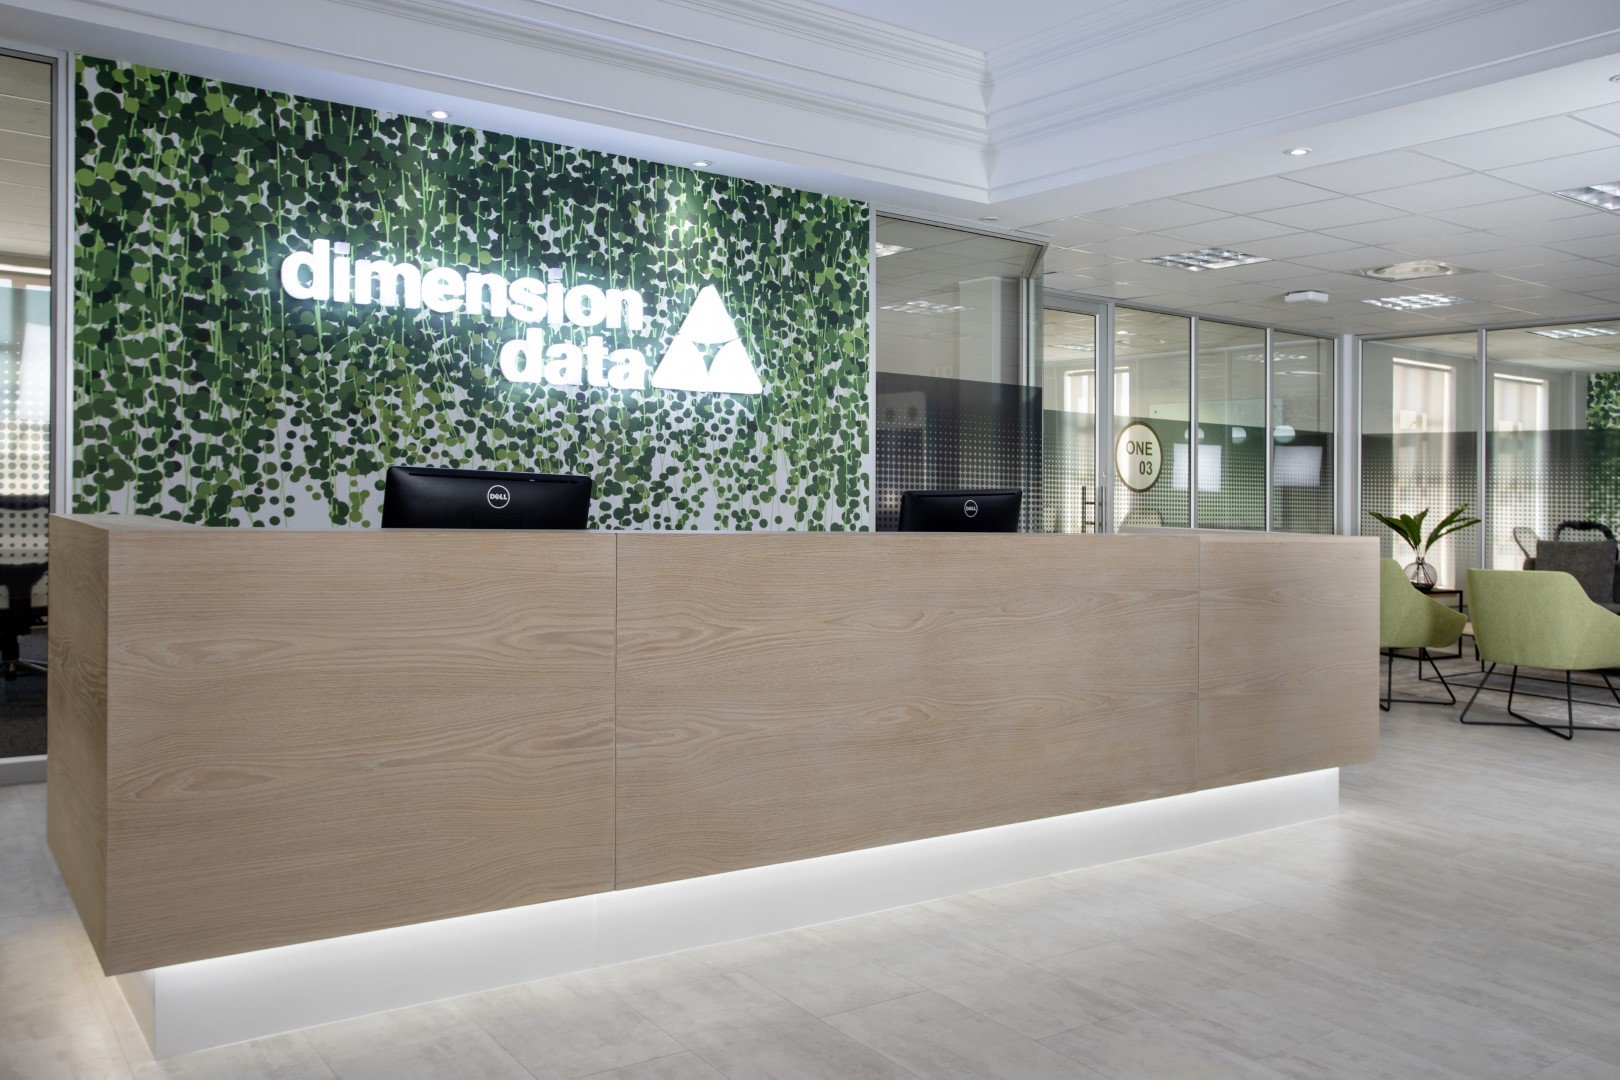 Dimension Data at The Campus Office Park